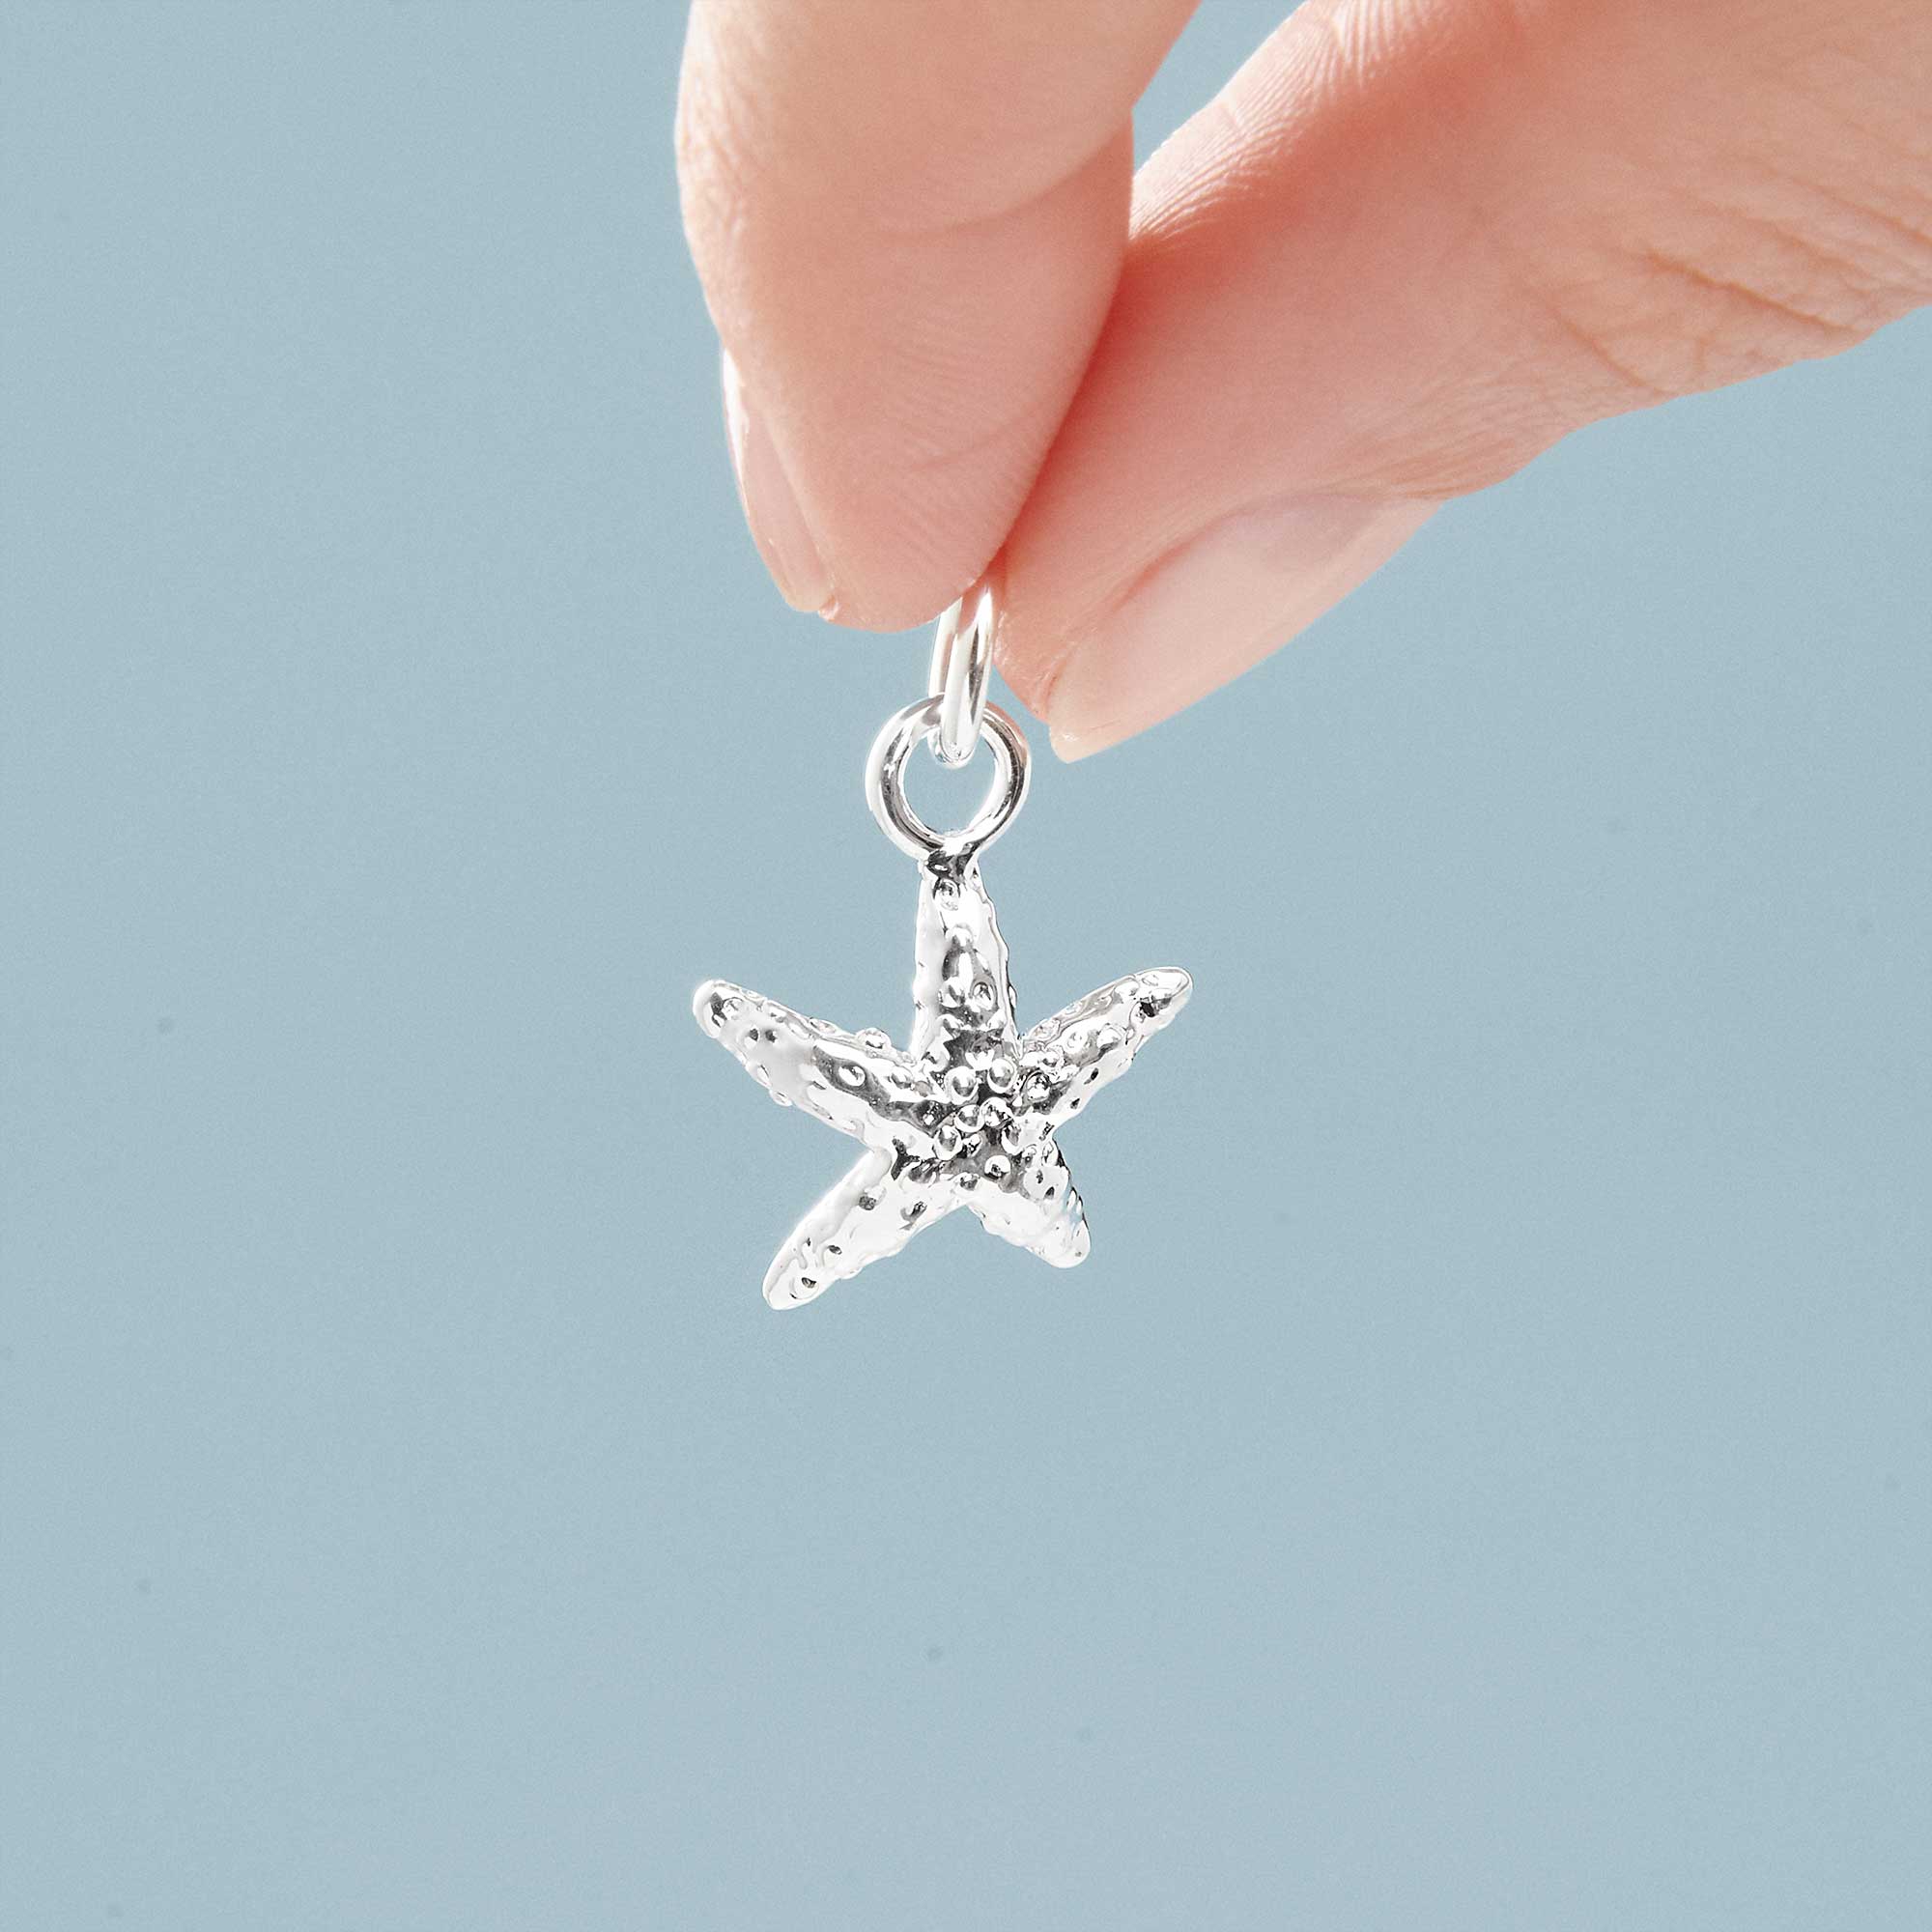 Starfish Silver Charm for Bracelet and necklace from Scarlett Jewellery